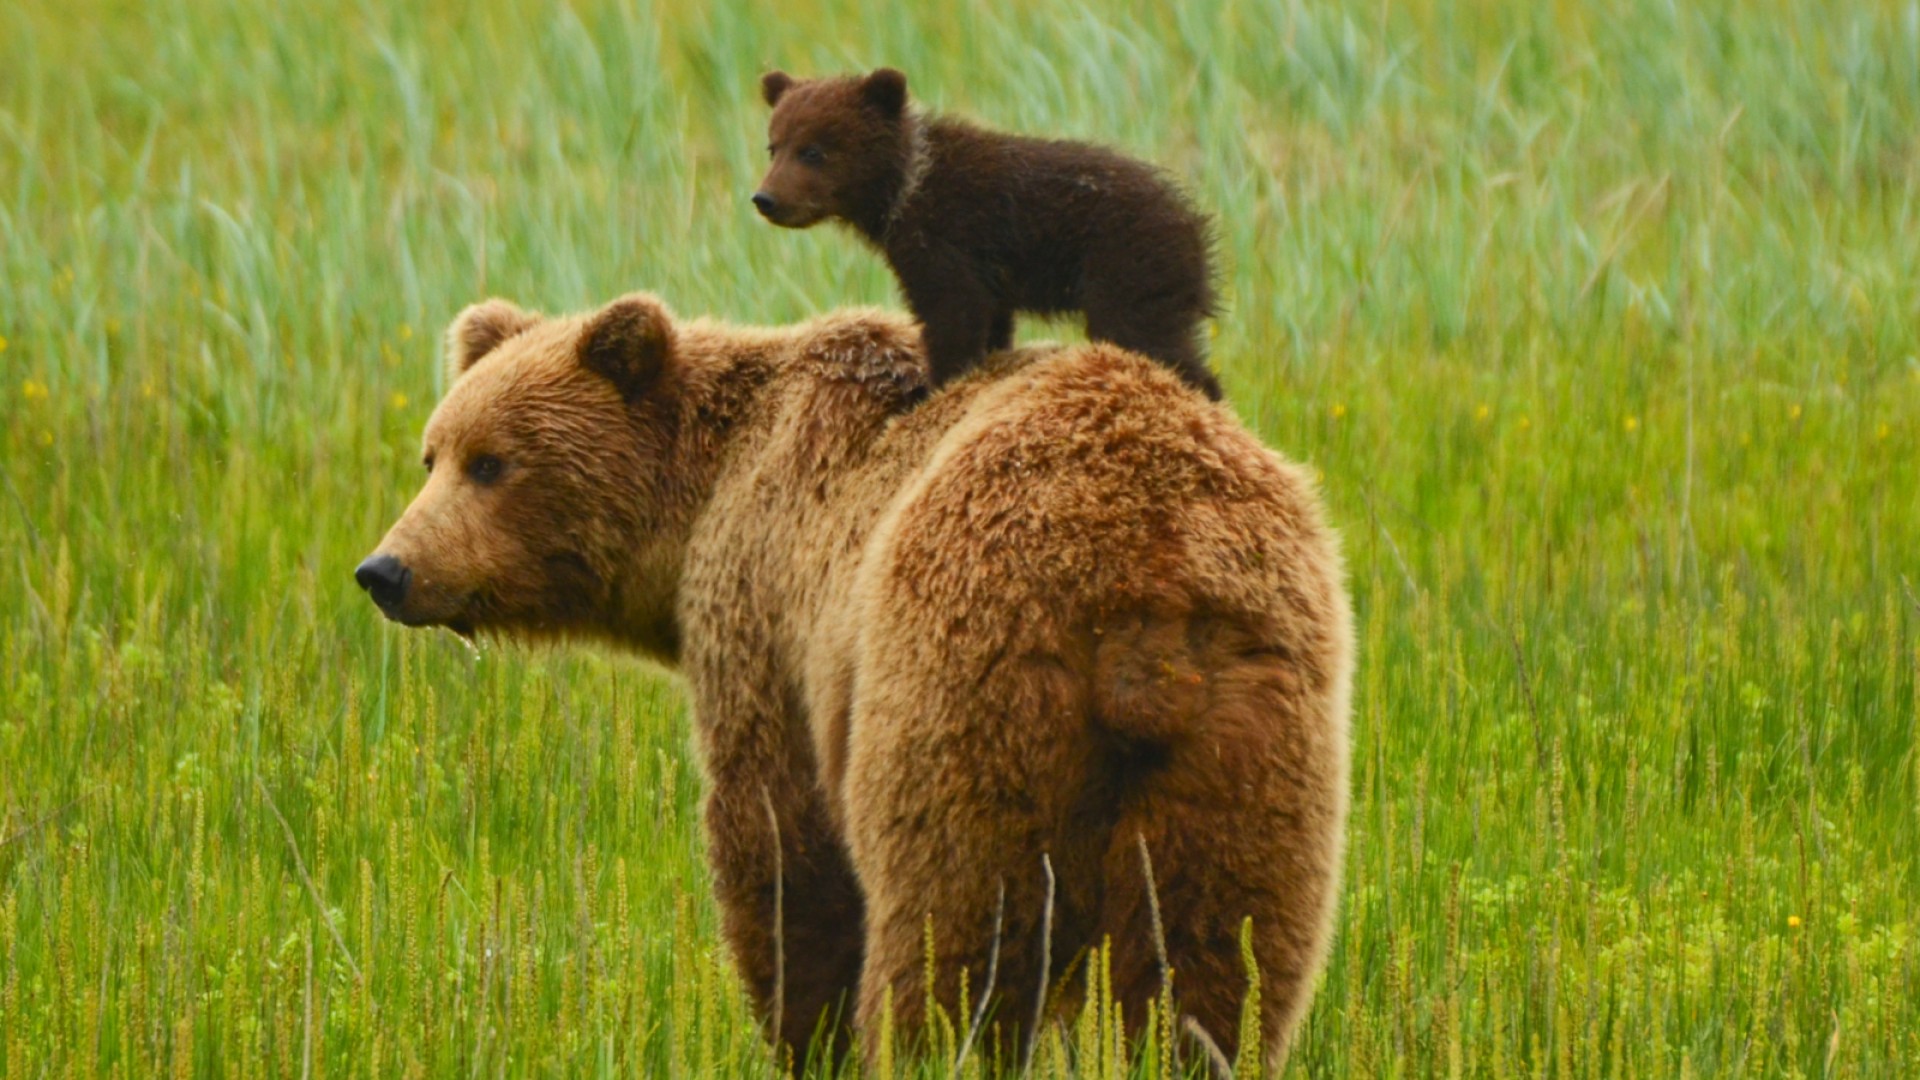 Grizzly bear mom and cub looking in the same direction in green grass